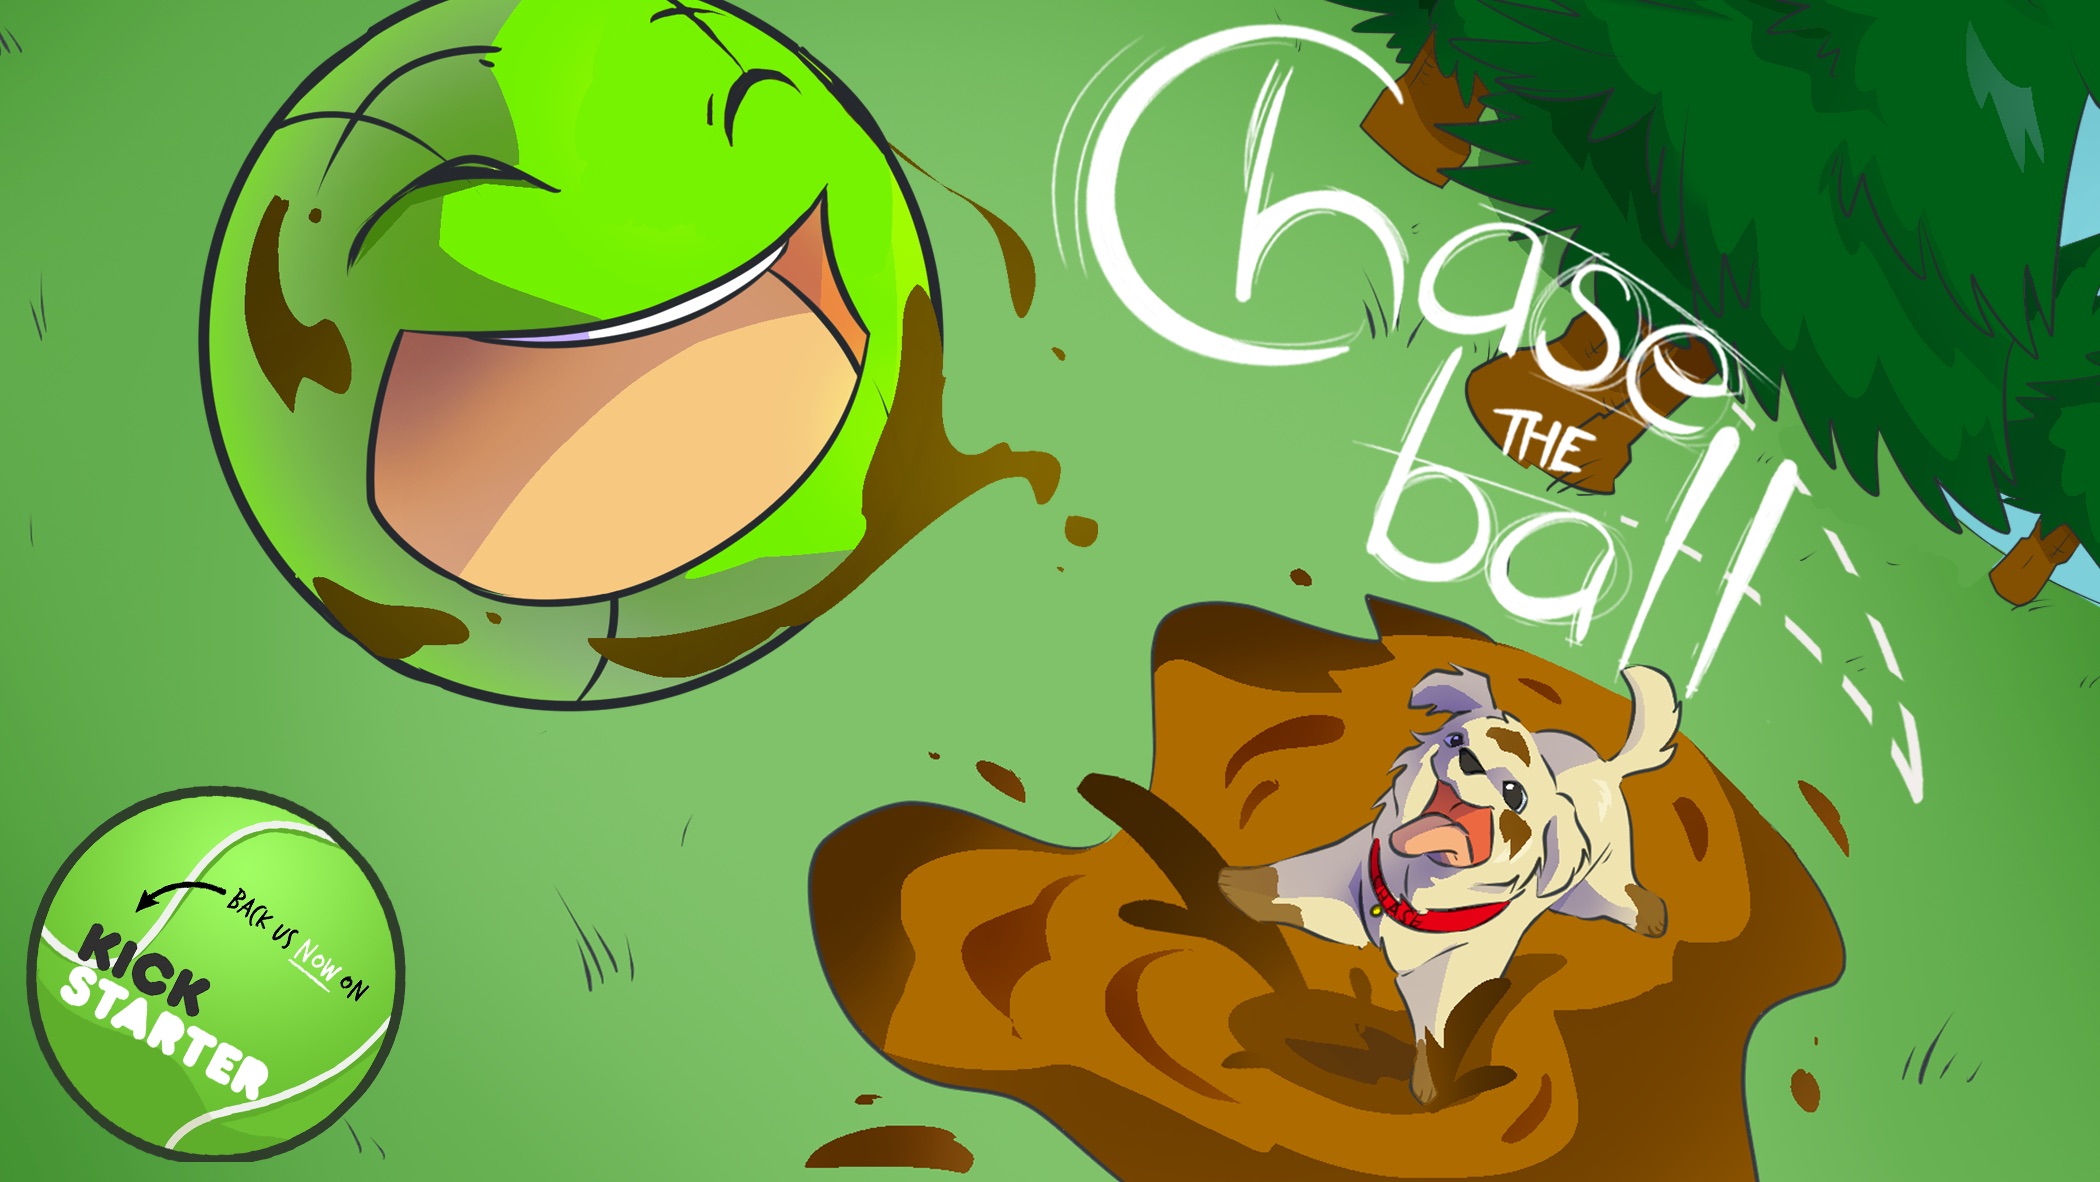 Kickstarter Campaign– Animated short titled Chase the Ball.